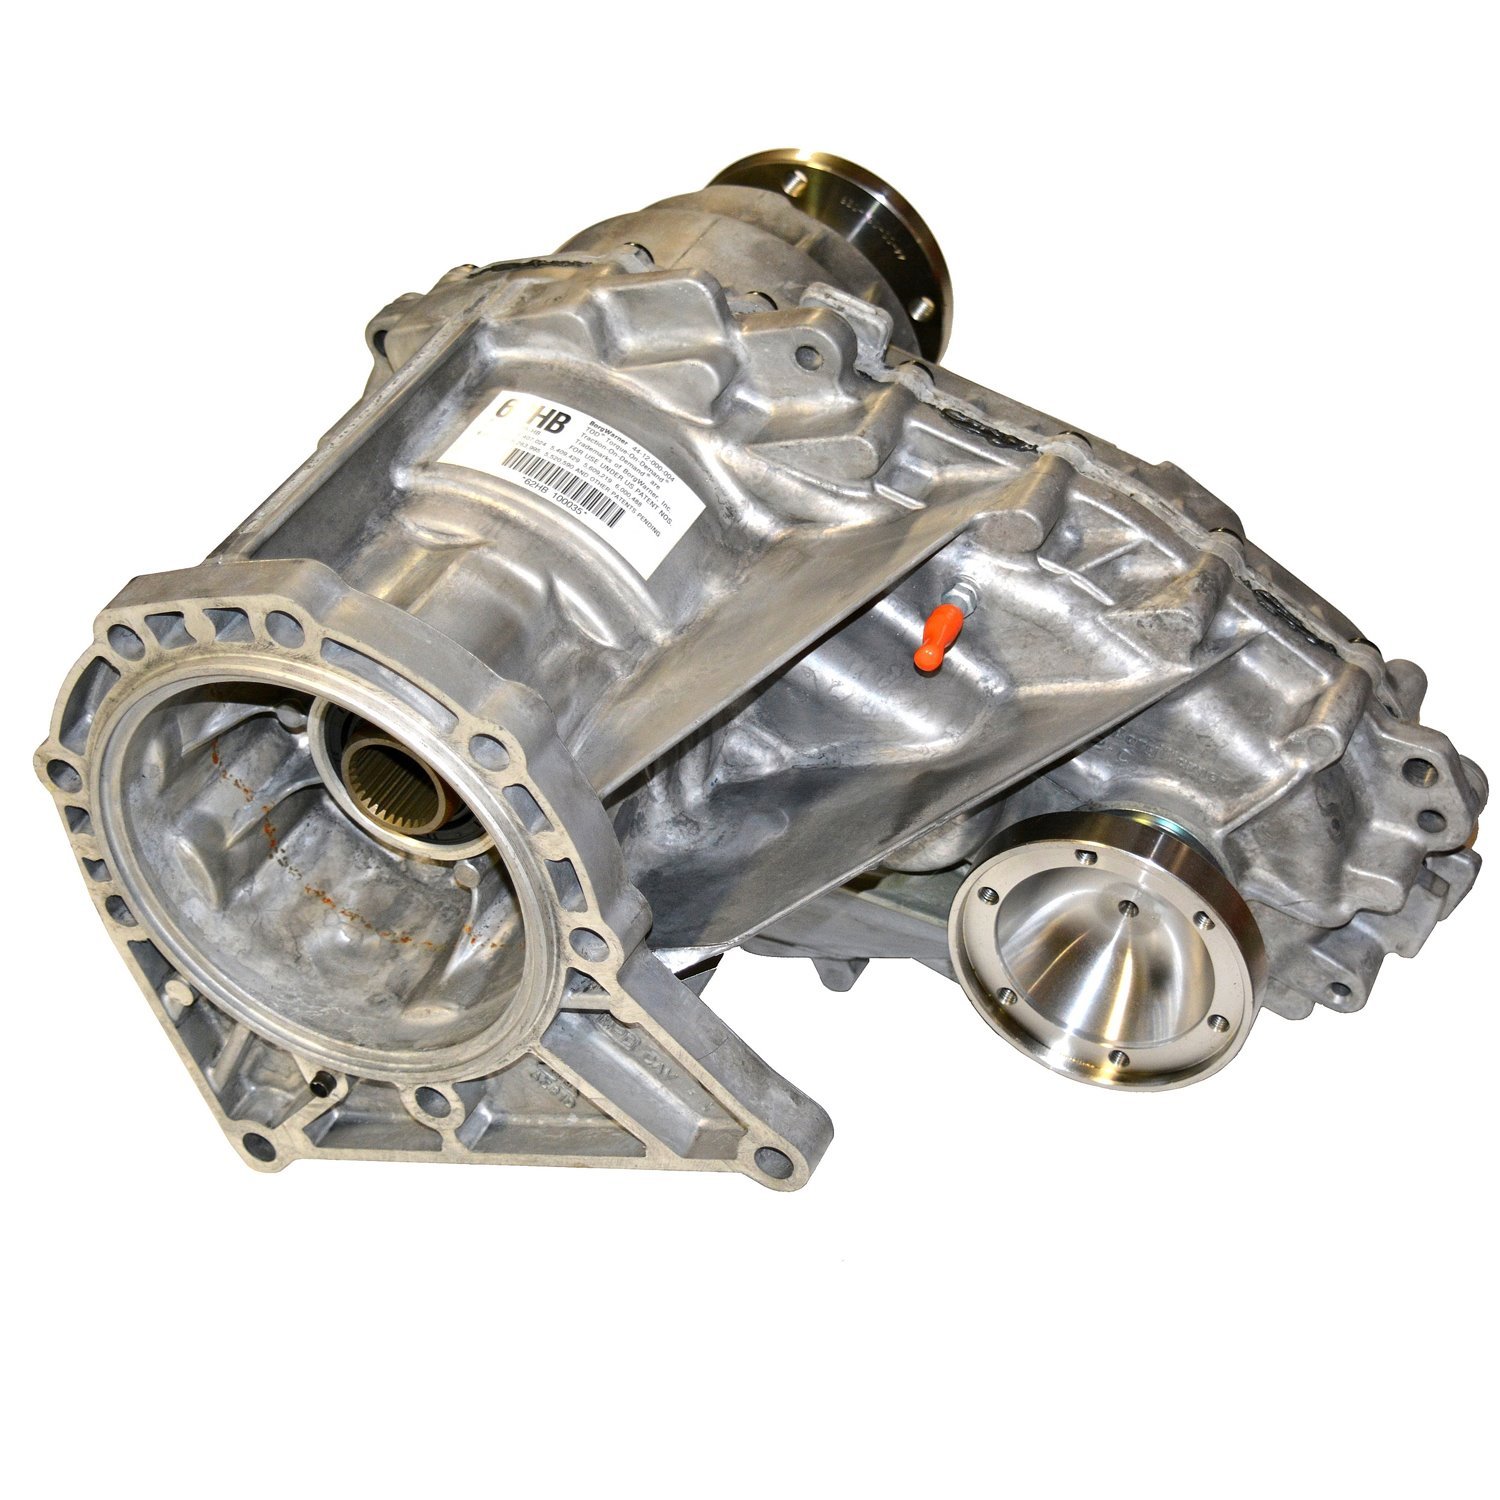 Remanufactured BW4412 Transfer Case for Ford 06-10 Explorer & Mountaineer 4.6L Single Speed AWD